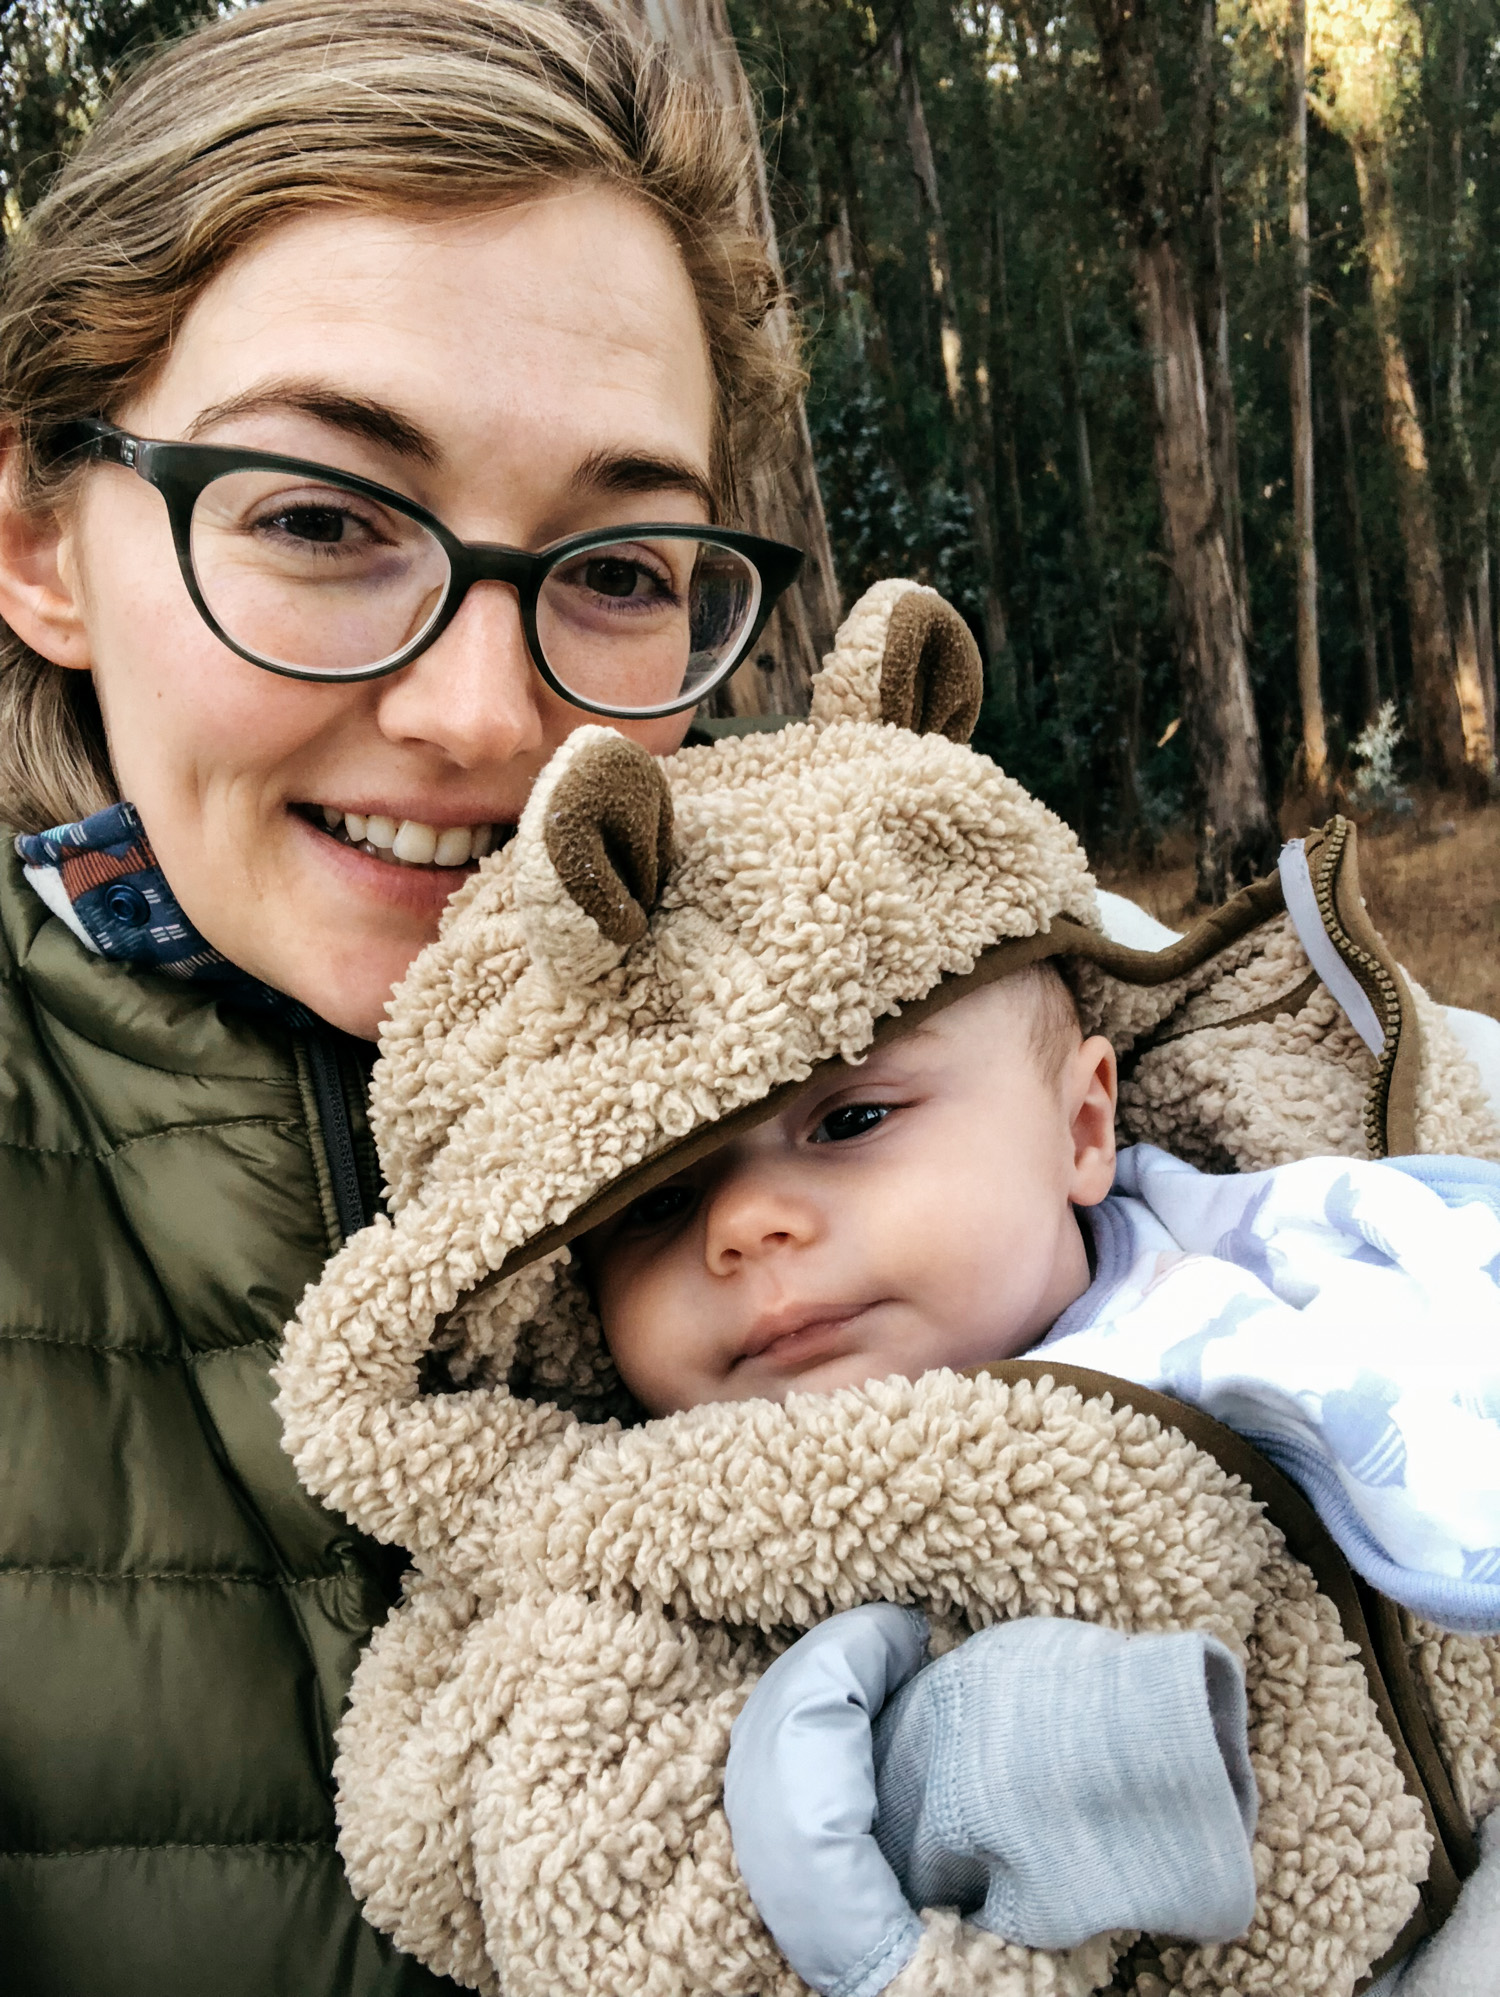 Camping with an infant